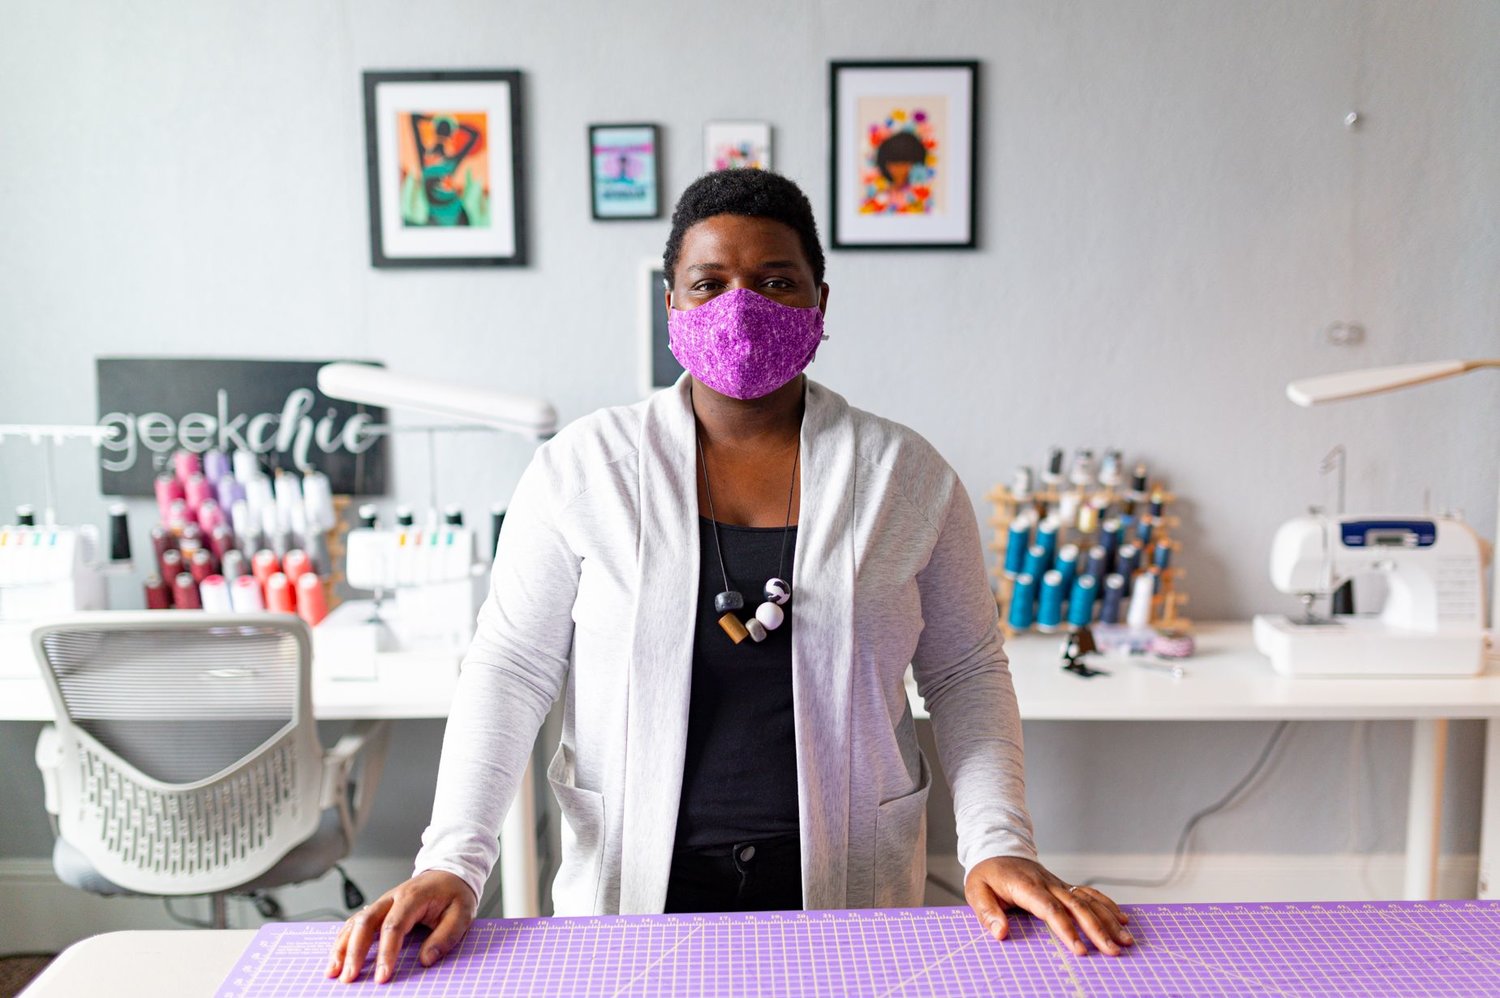 Lysandra Weber stands at her cutting table in her recently purchased studio in downtown Pittsboro. Weber is the founder and owner of Geekchicfashion, a clothing store featuring modern, comfortable and handmade designs.